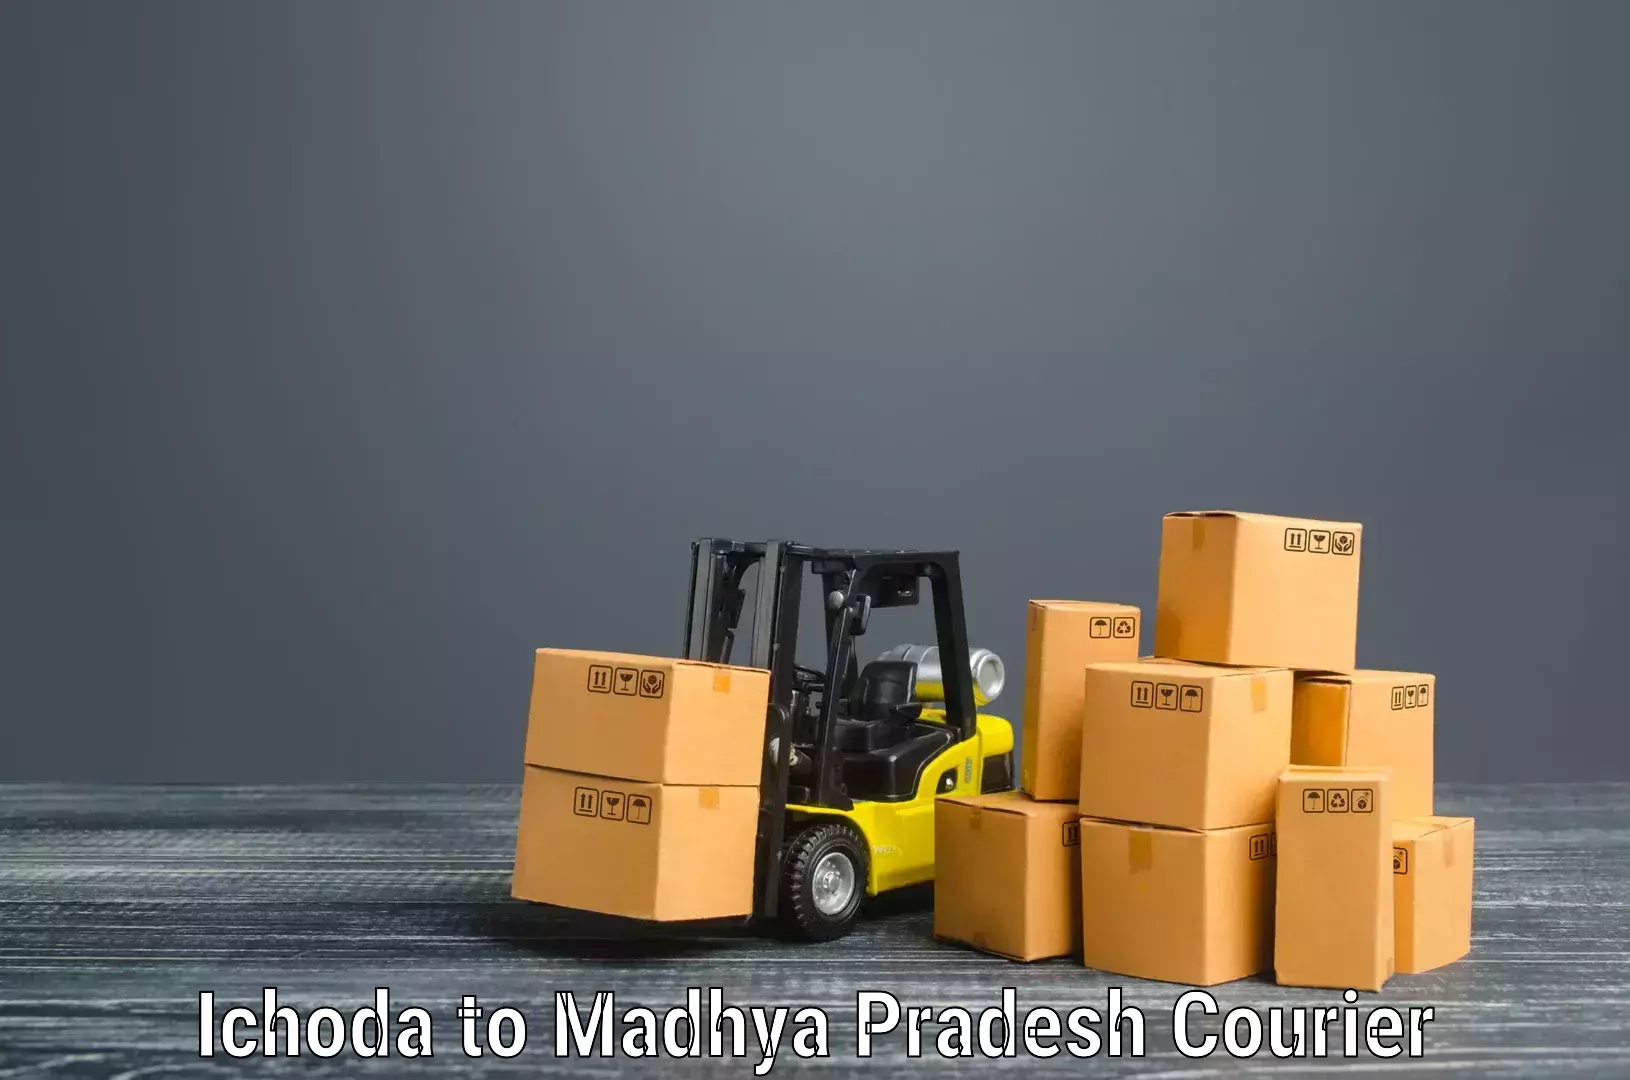 Furniture delivery service Ichoda to Athner